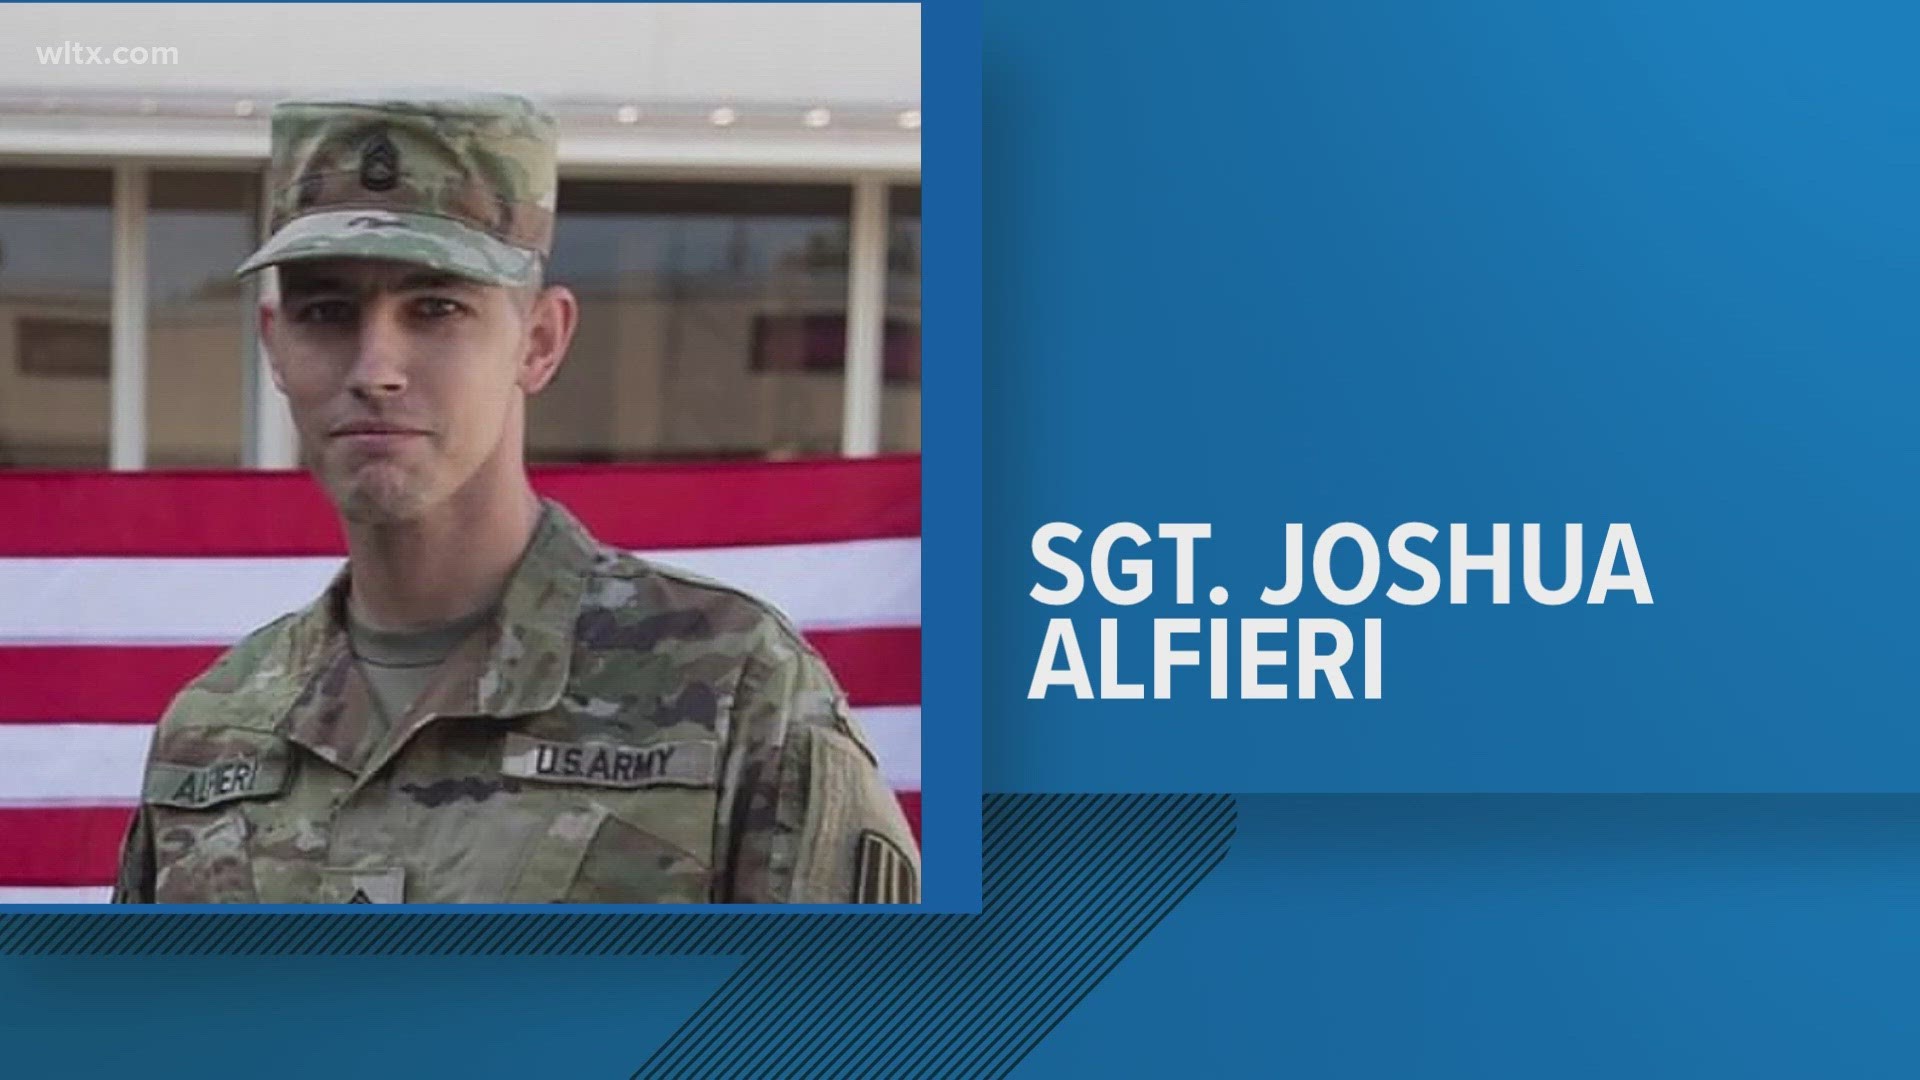 Sgt First Class Joshua Alfieri, 36, was found dead in his residence last Thursday.